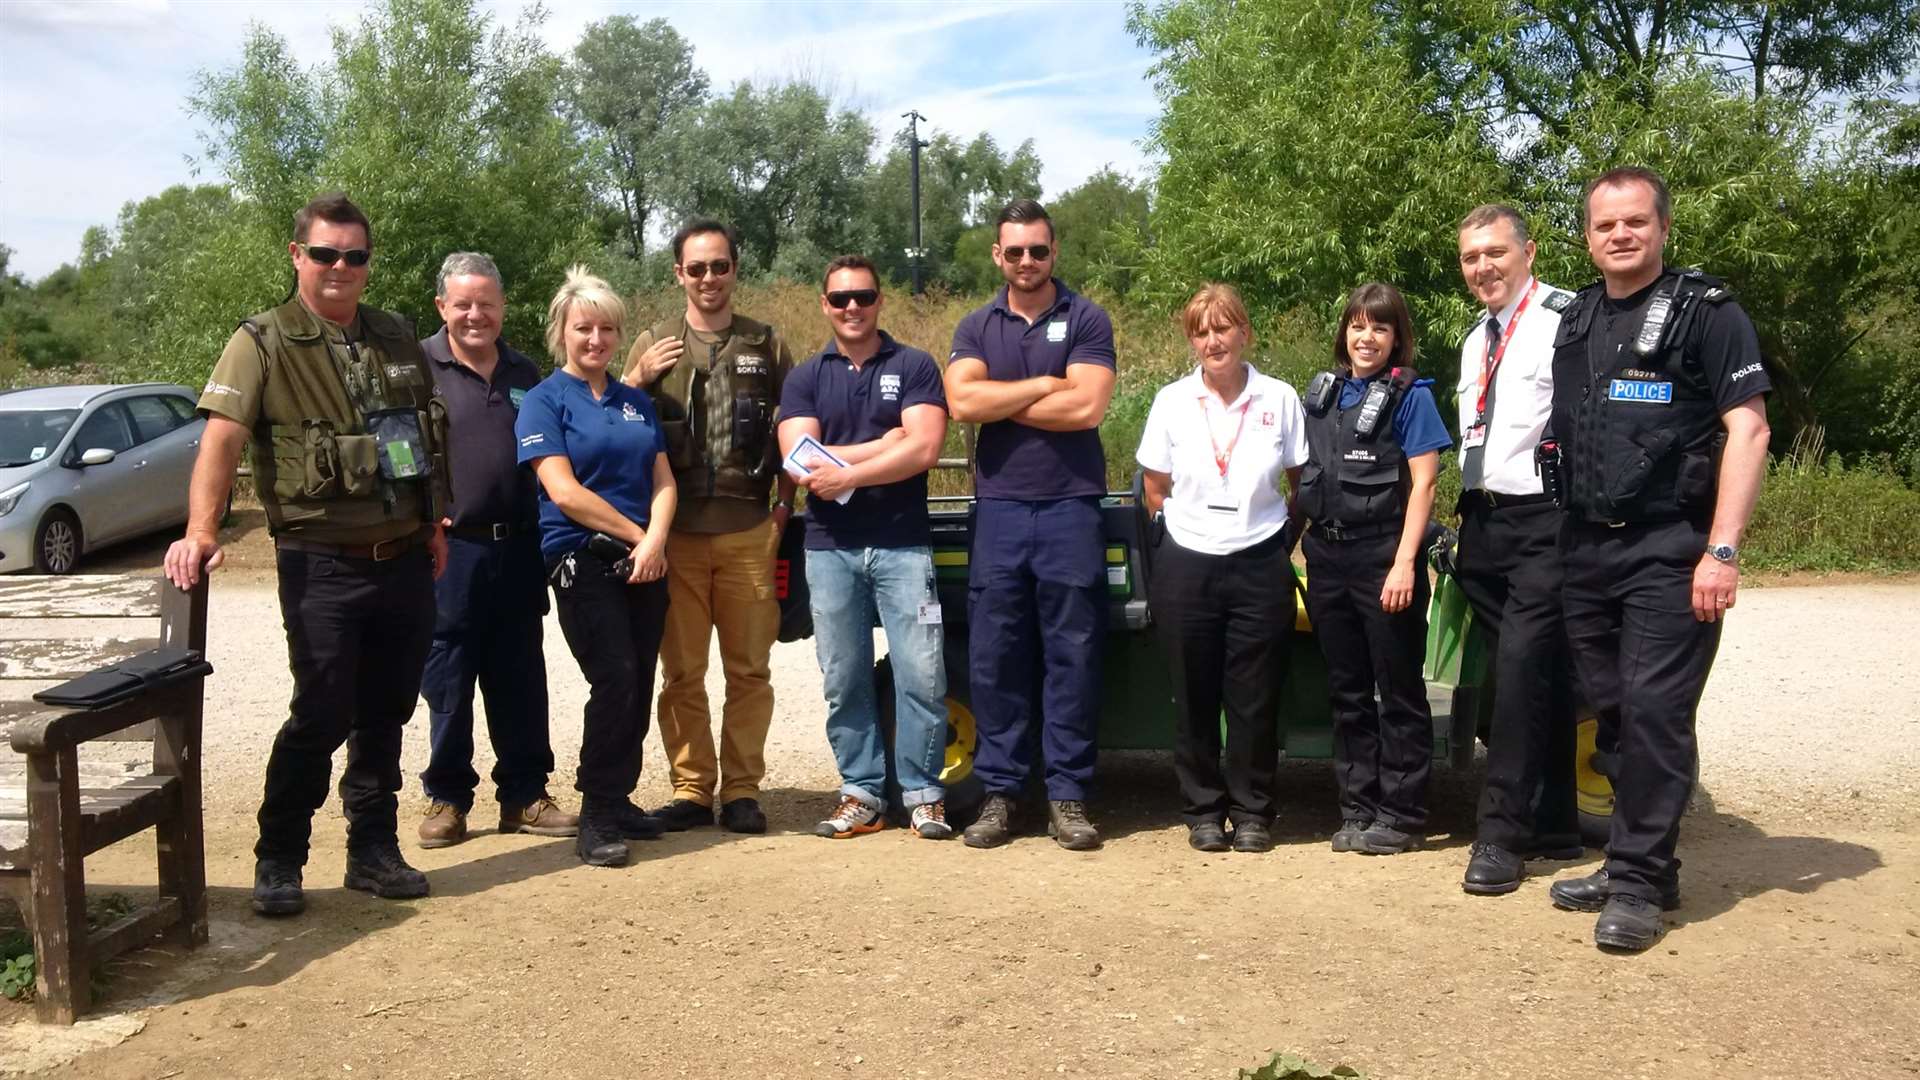 Operation Orkney saw a number of representatives meet at Leybourne Lakes to discuss dangers with members of the public